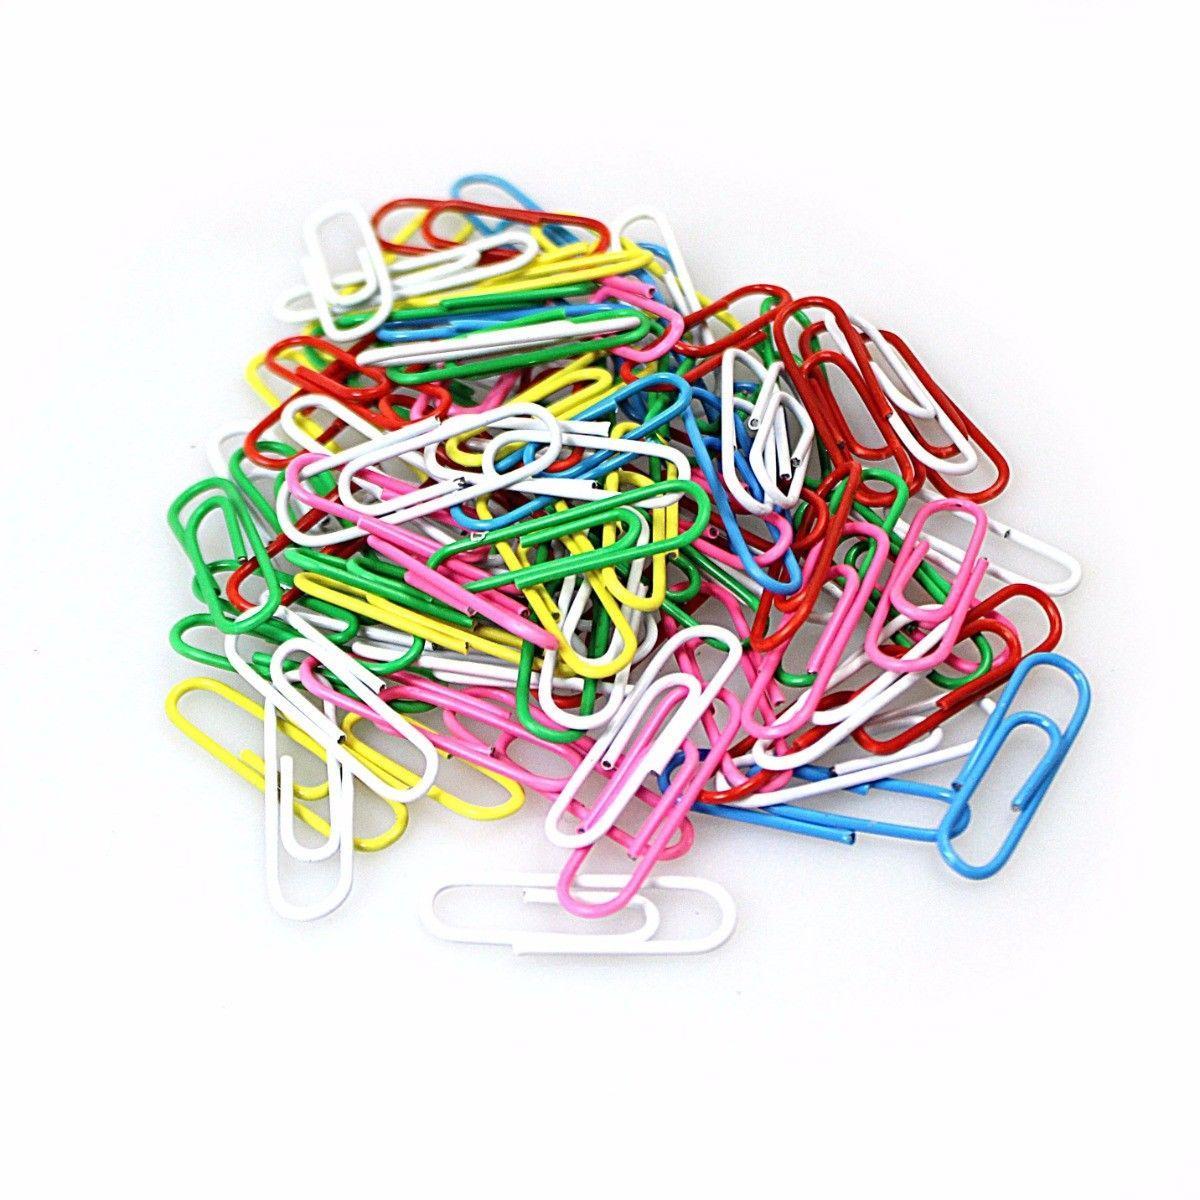 Daily Necessities Assorted Colour Paper Clips Home School Stationery 100 Pack 2191 (Large Letter Rate)